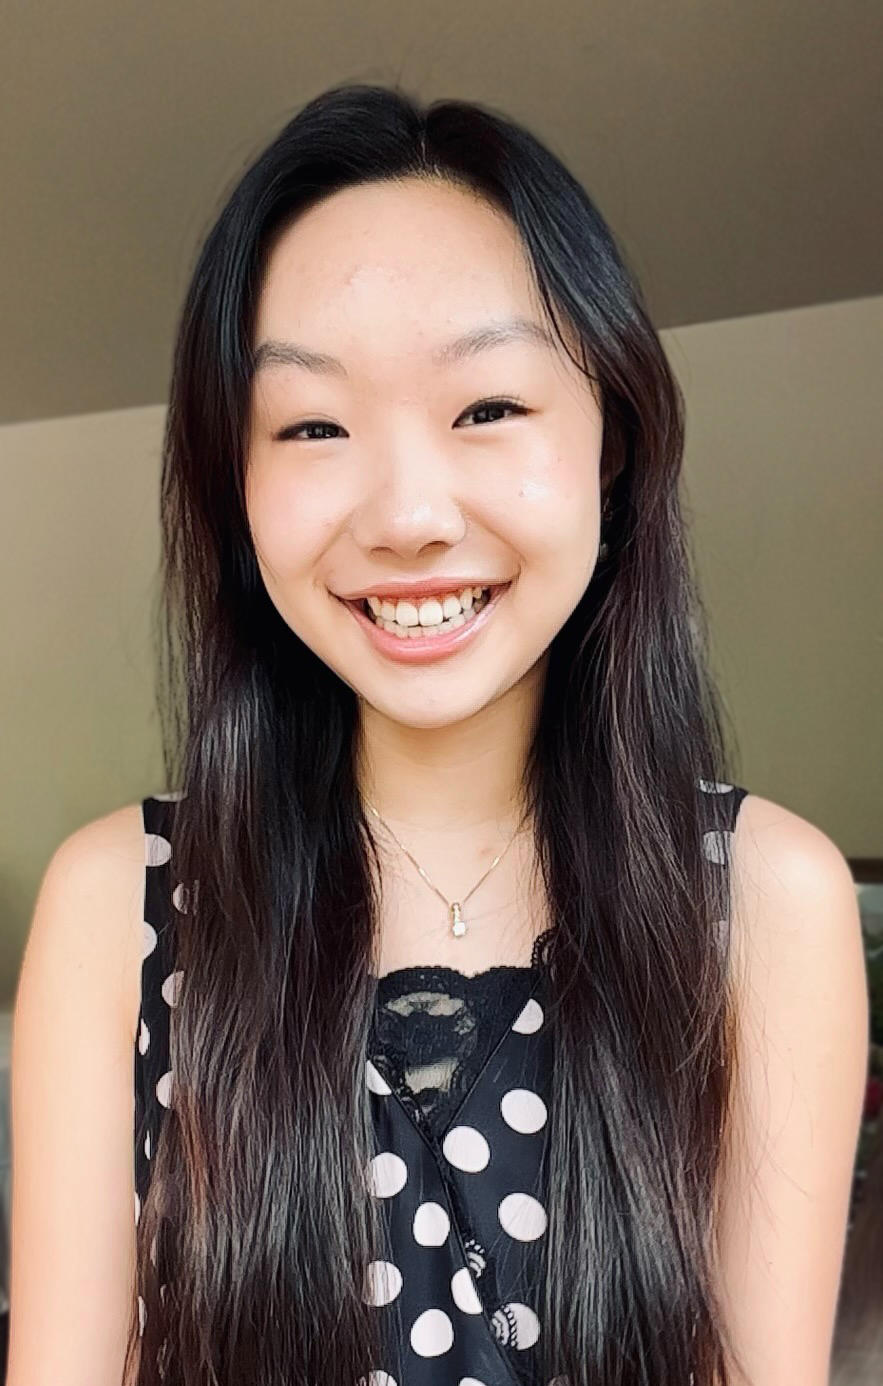 Seventeen-year-old Grace Go submitted a winning podcast about mental health and comfort food.